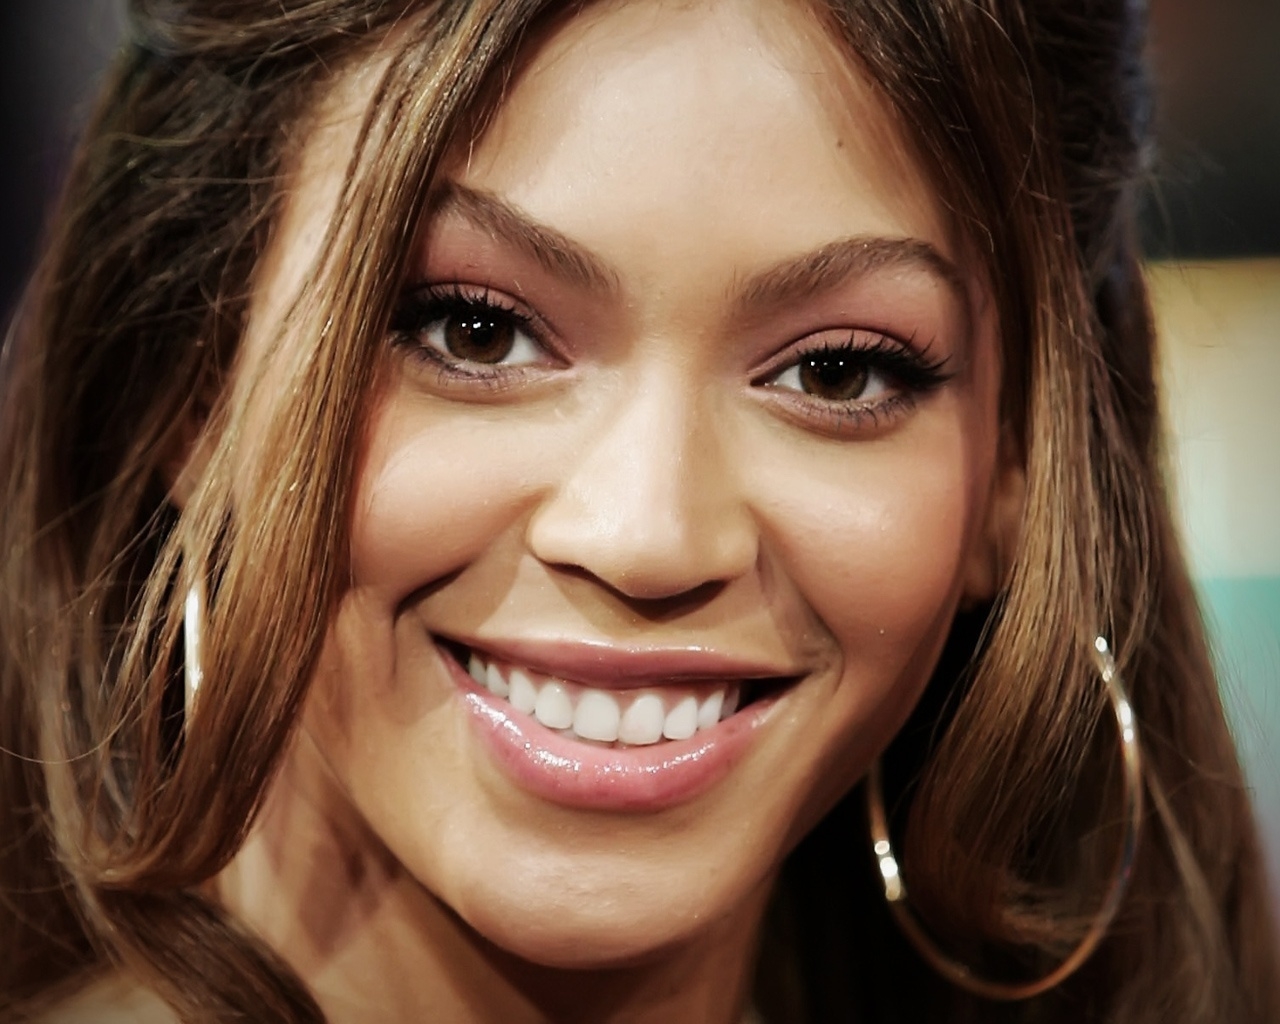 Beyonce Knowles happy for 1280 x 1024 resolution